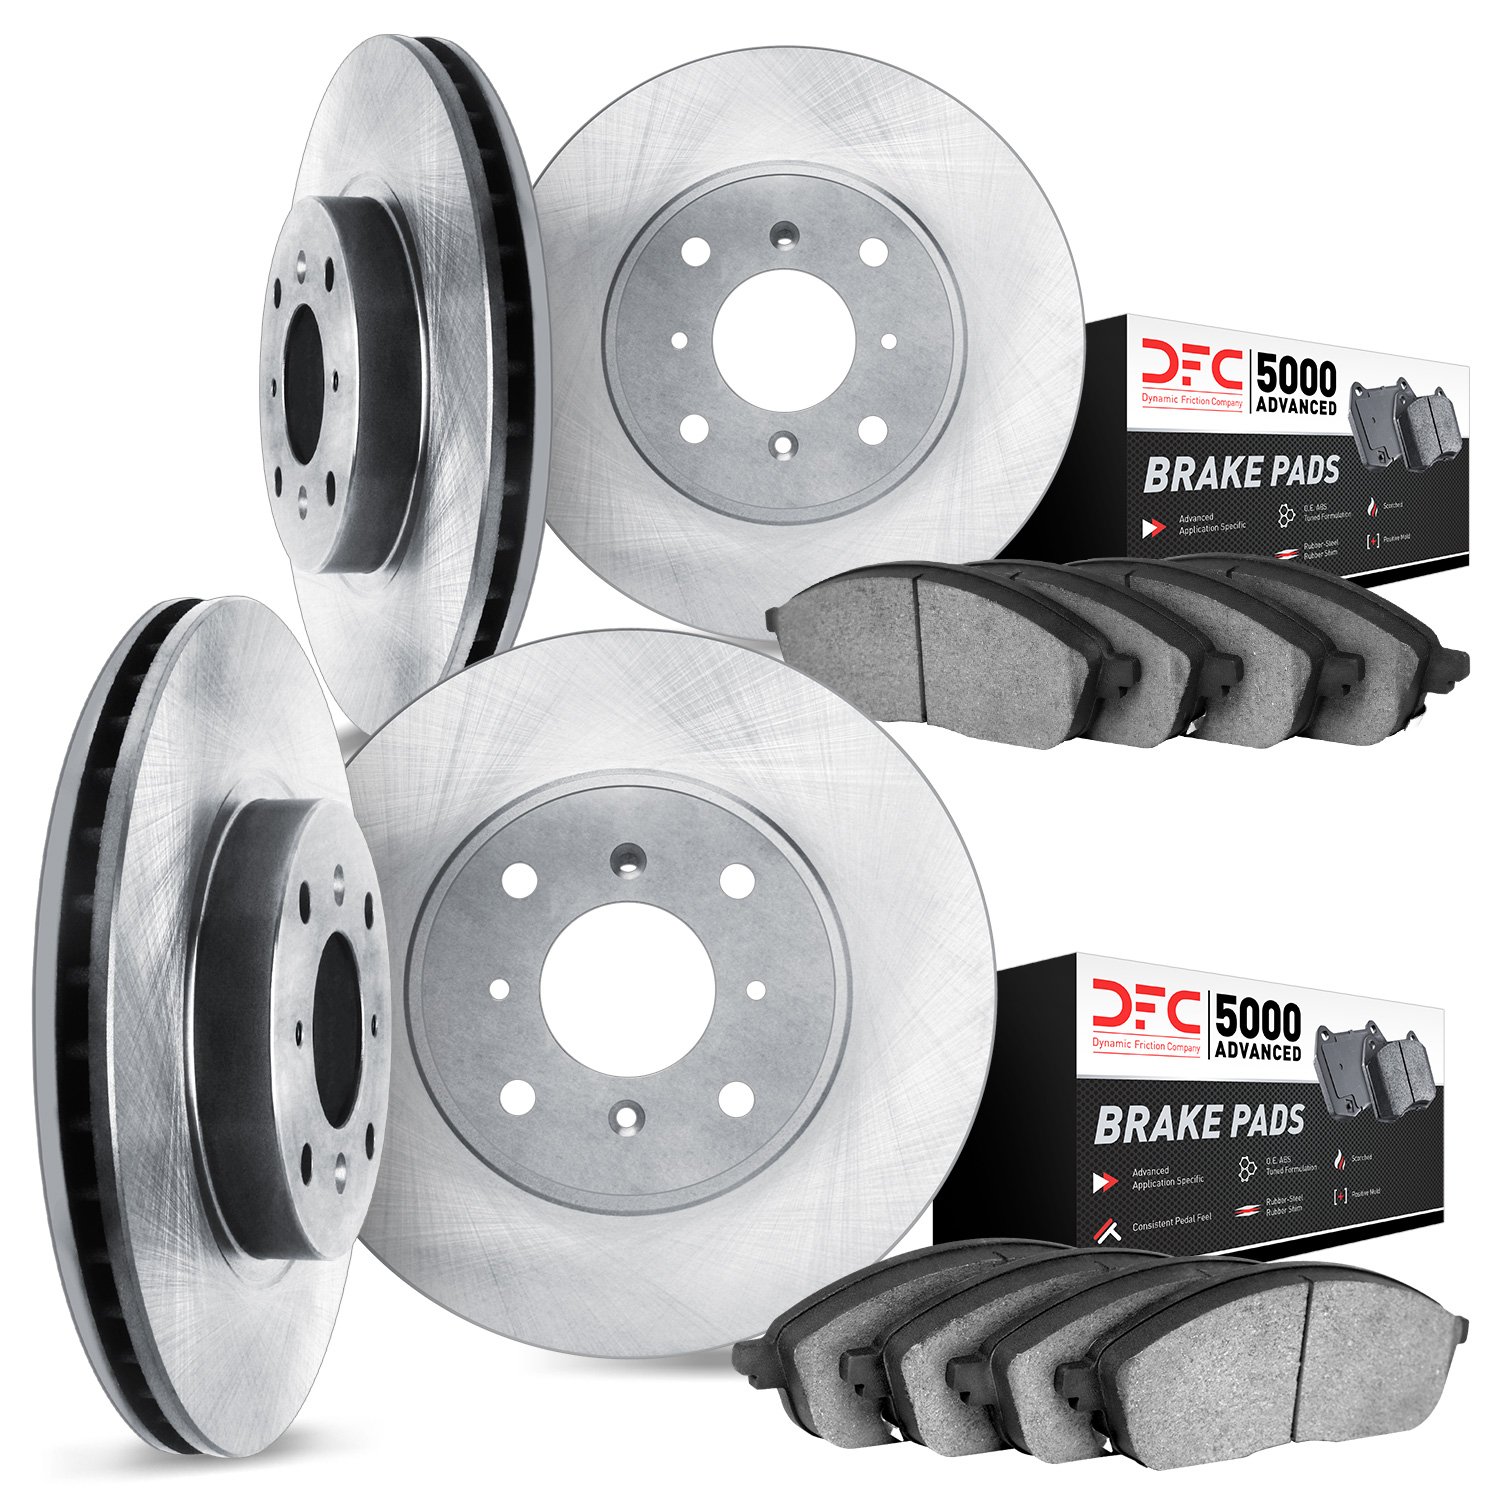 6504-56099 Brake Rotors w/5000 Advanced Brake Pads Kit, 1998-2002 Ford/Lincoln/Mercury/Mazda, Position: Front and Rear